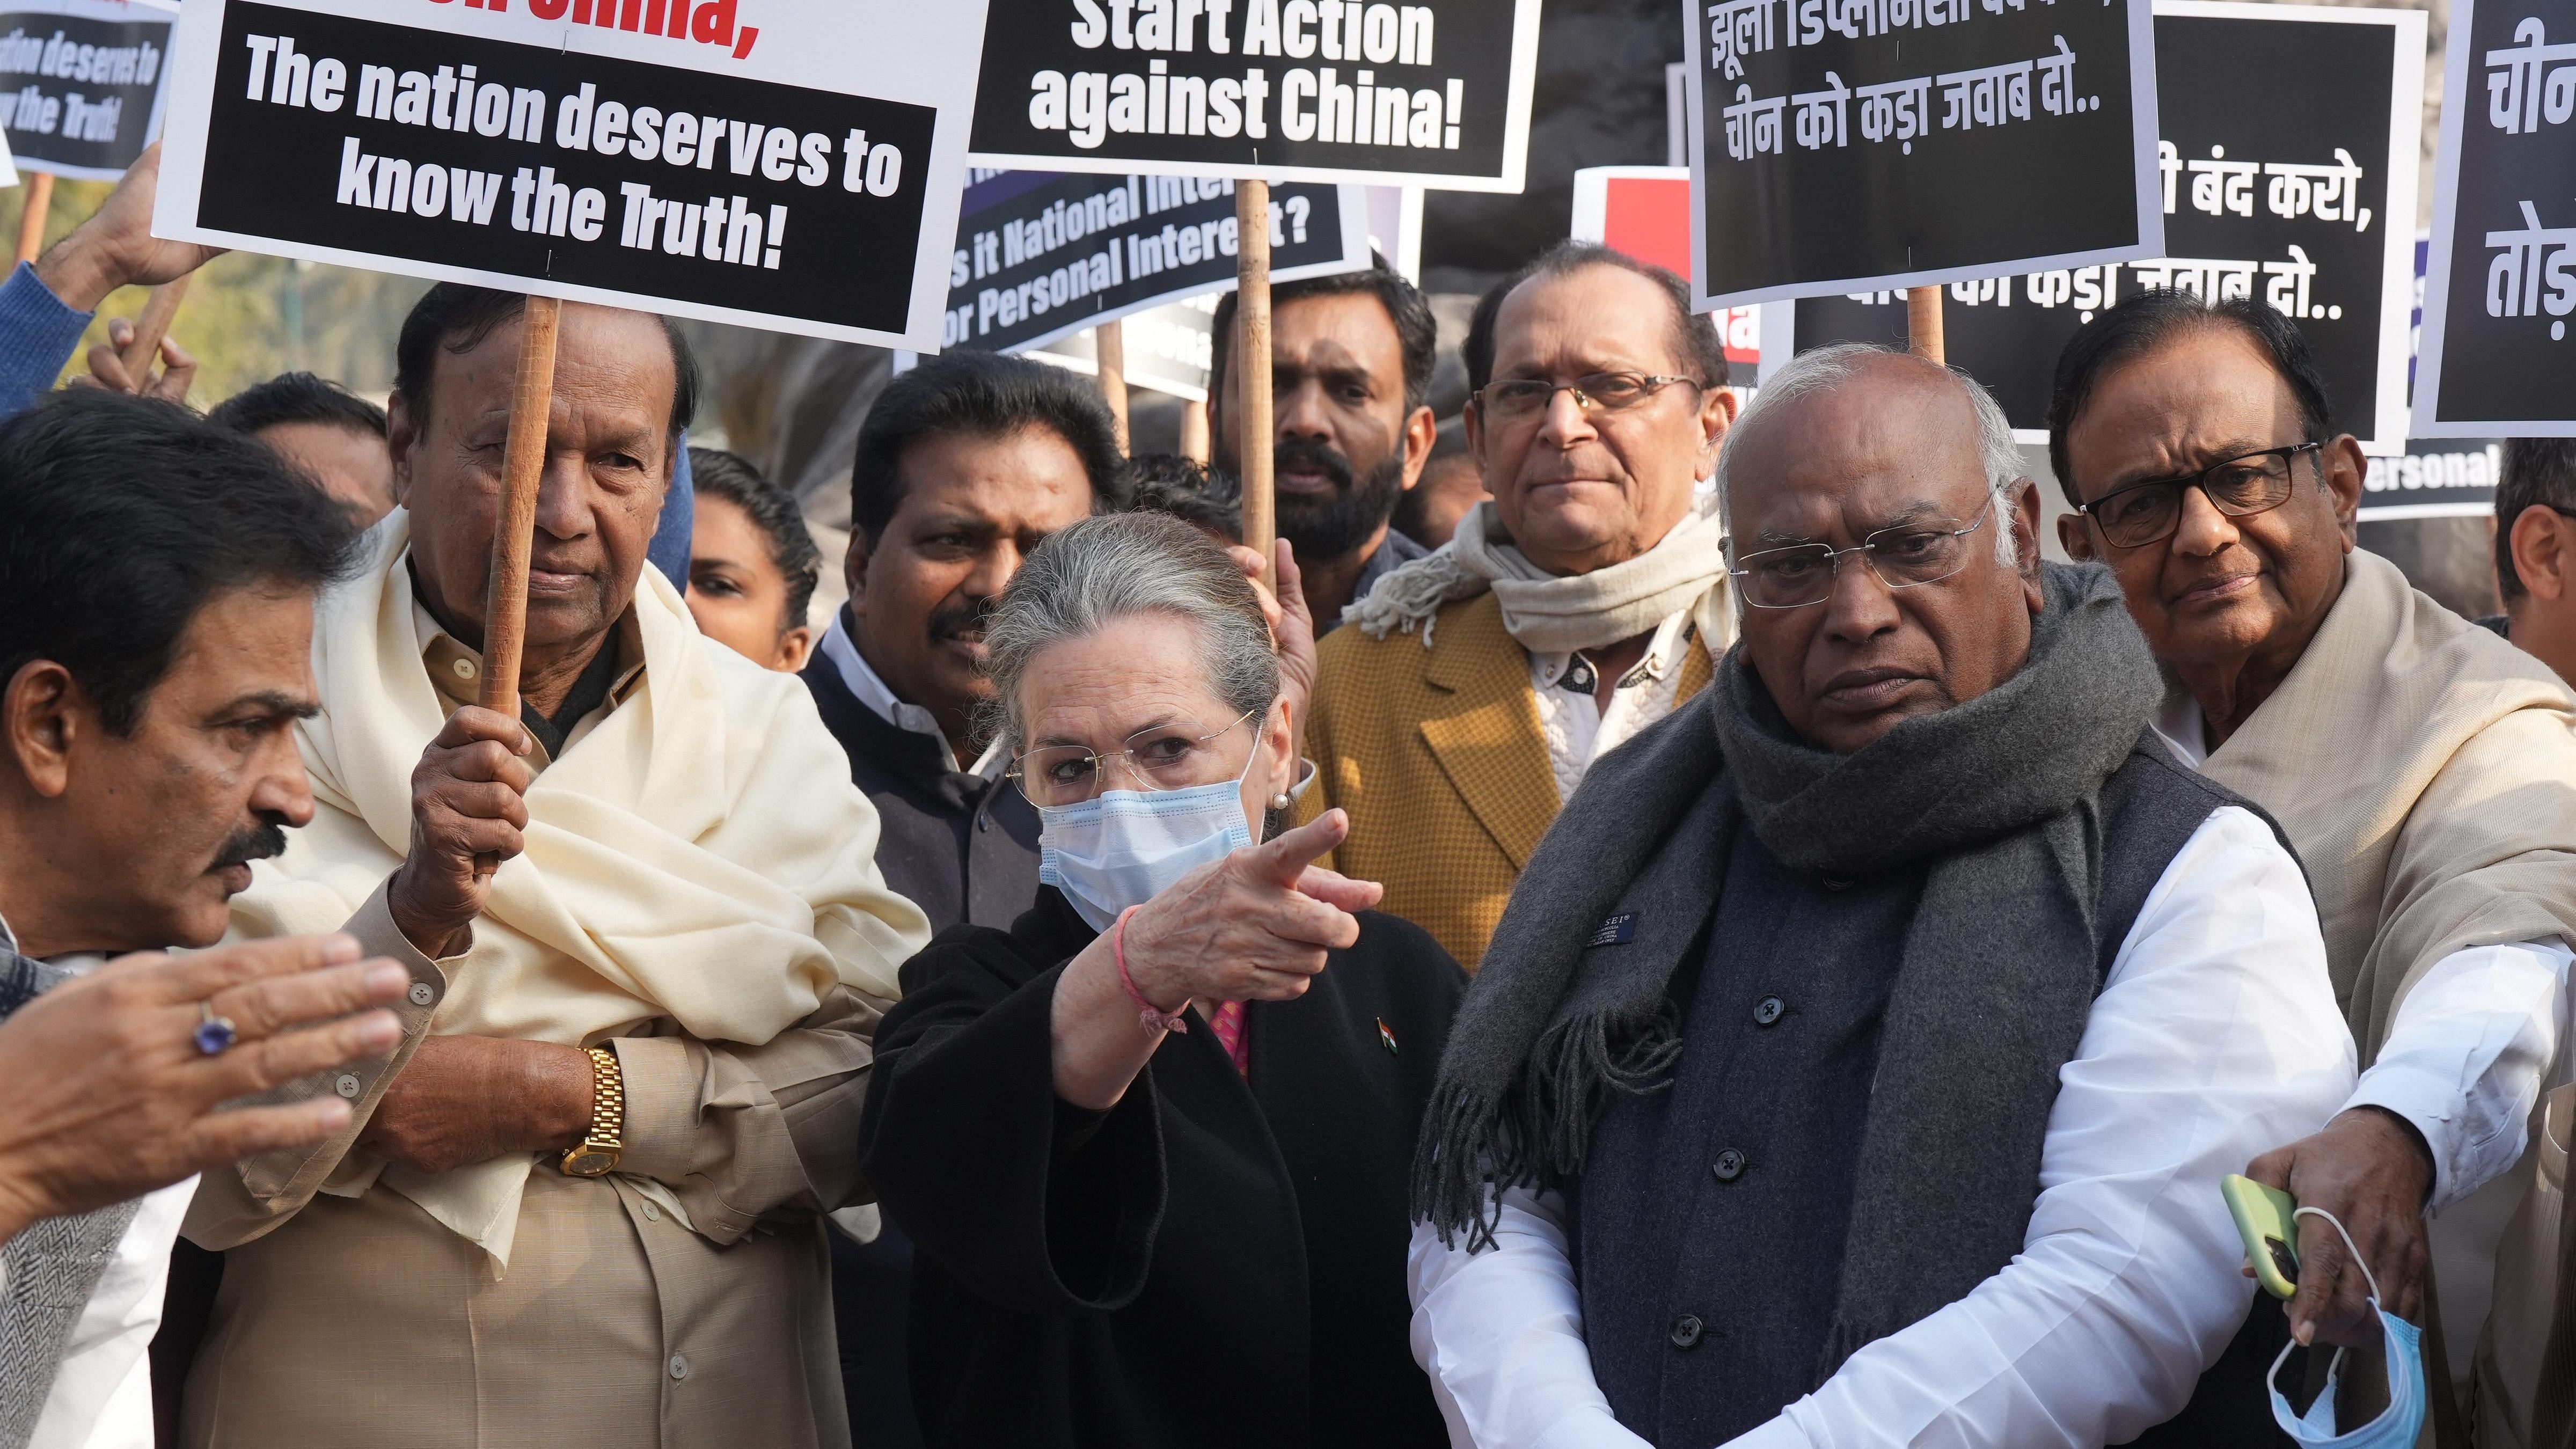 Congress MPs Mallikarjun Kharge, Sonia Gandhi, P Chidambaram, KC Venugopal, DMK's TR Baalu and other members stage a protest near the Gandhi Statue demanding discussion on national security and Indo-China border dispute issue during the Winter Session of Parliament, in New Delhi. Credit: PTI Photo